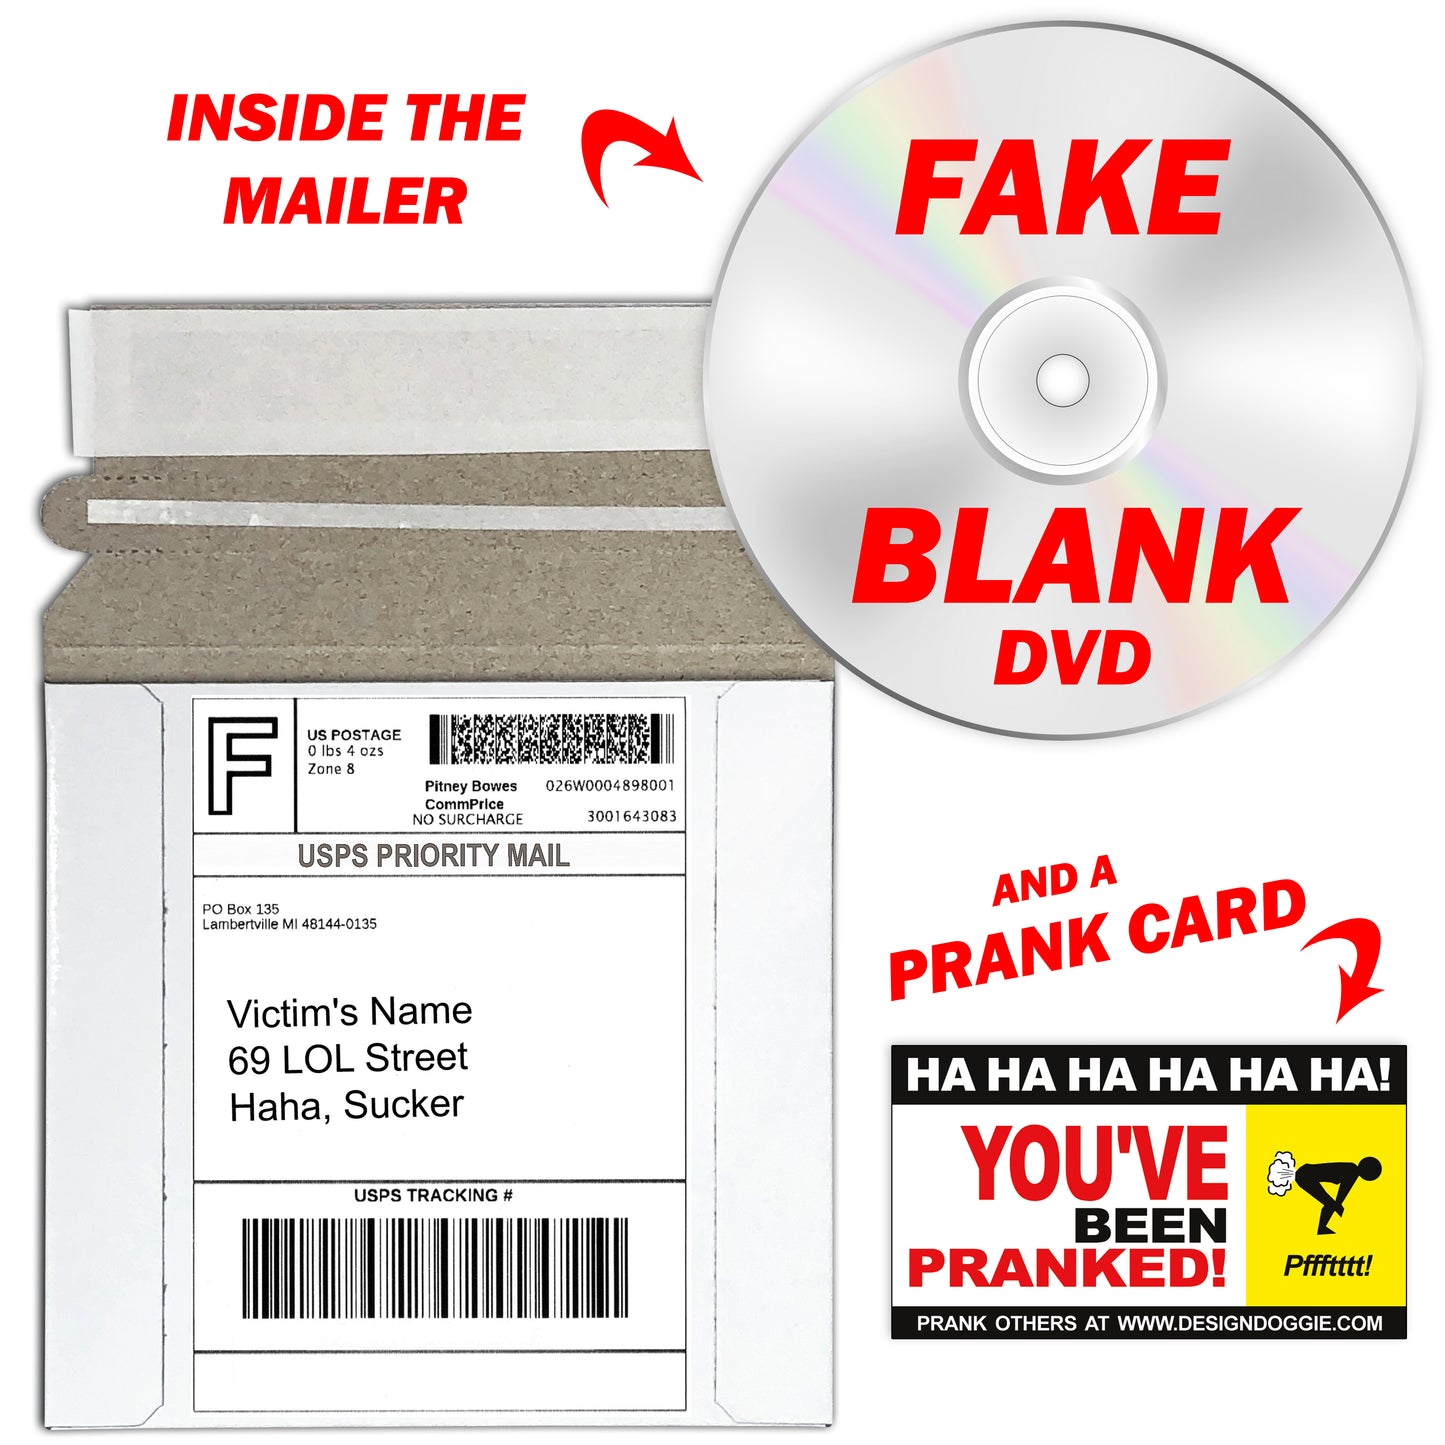 Watching Birds Poop Fake DVD mail prank gets sent directly to your victims 100% anonymously!